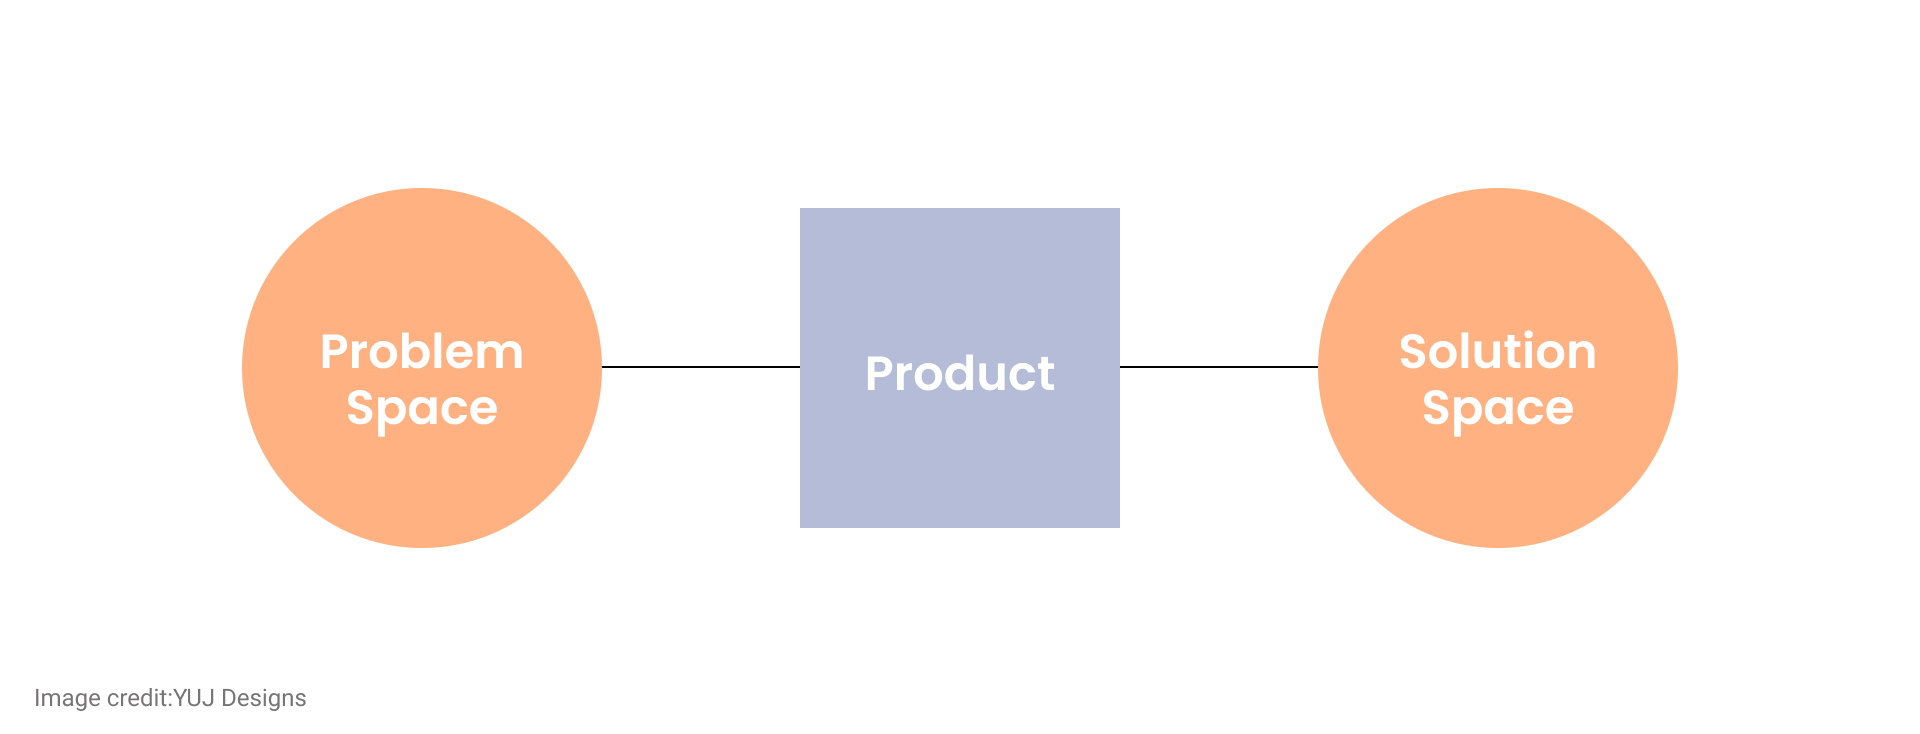 Product Thinking and Problem Solving